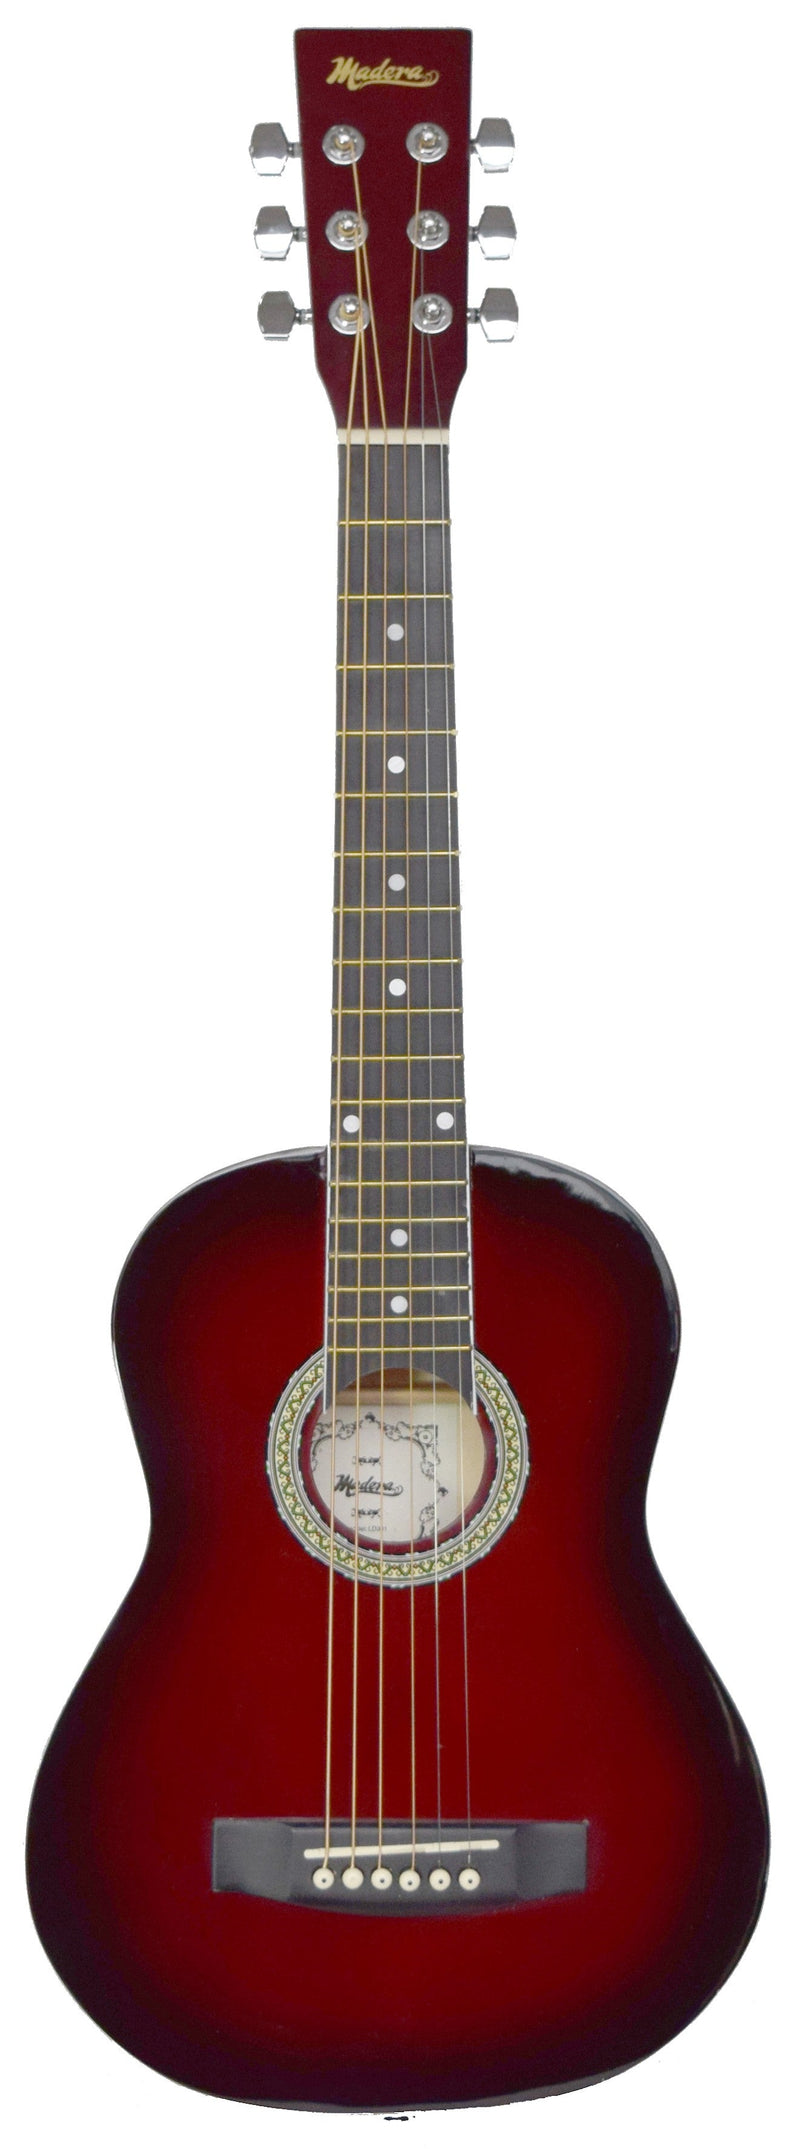 Madera LD301 Acoustic 1/2 Size Guitar 32" Wine Red Madera Instrument for sale canada